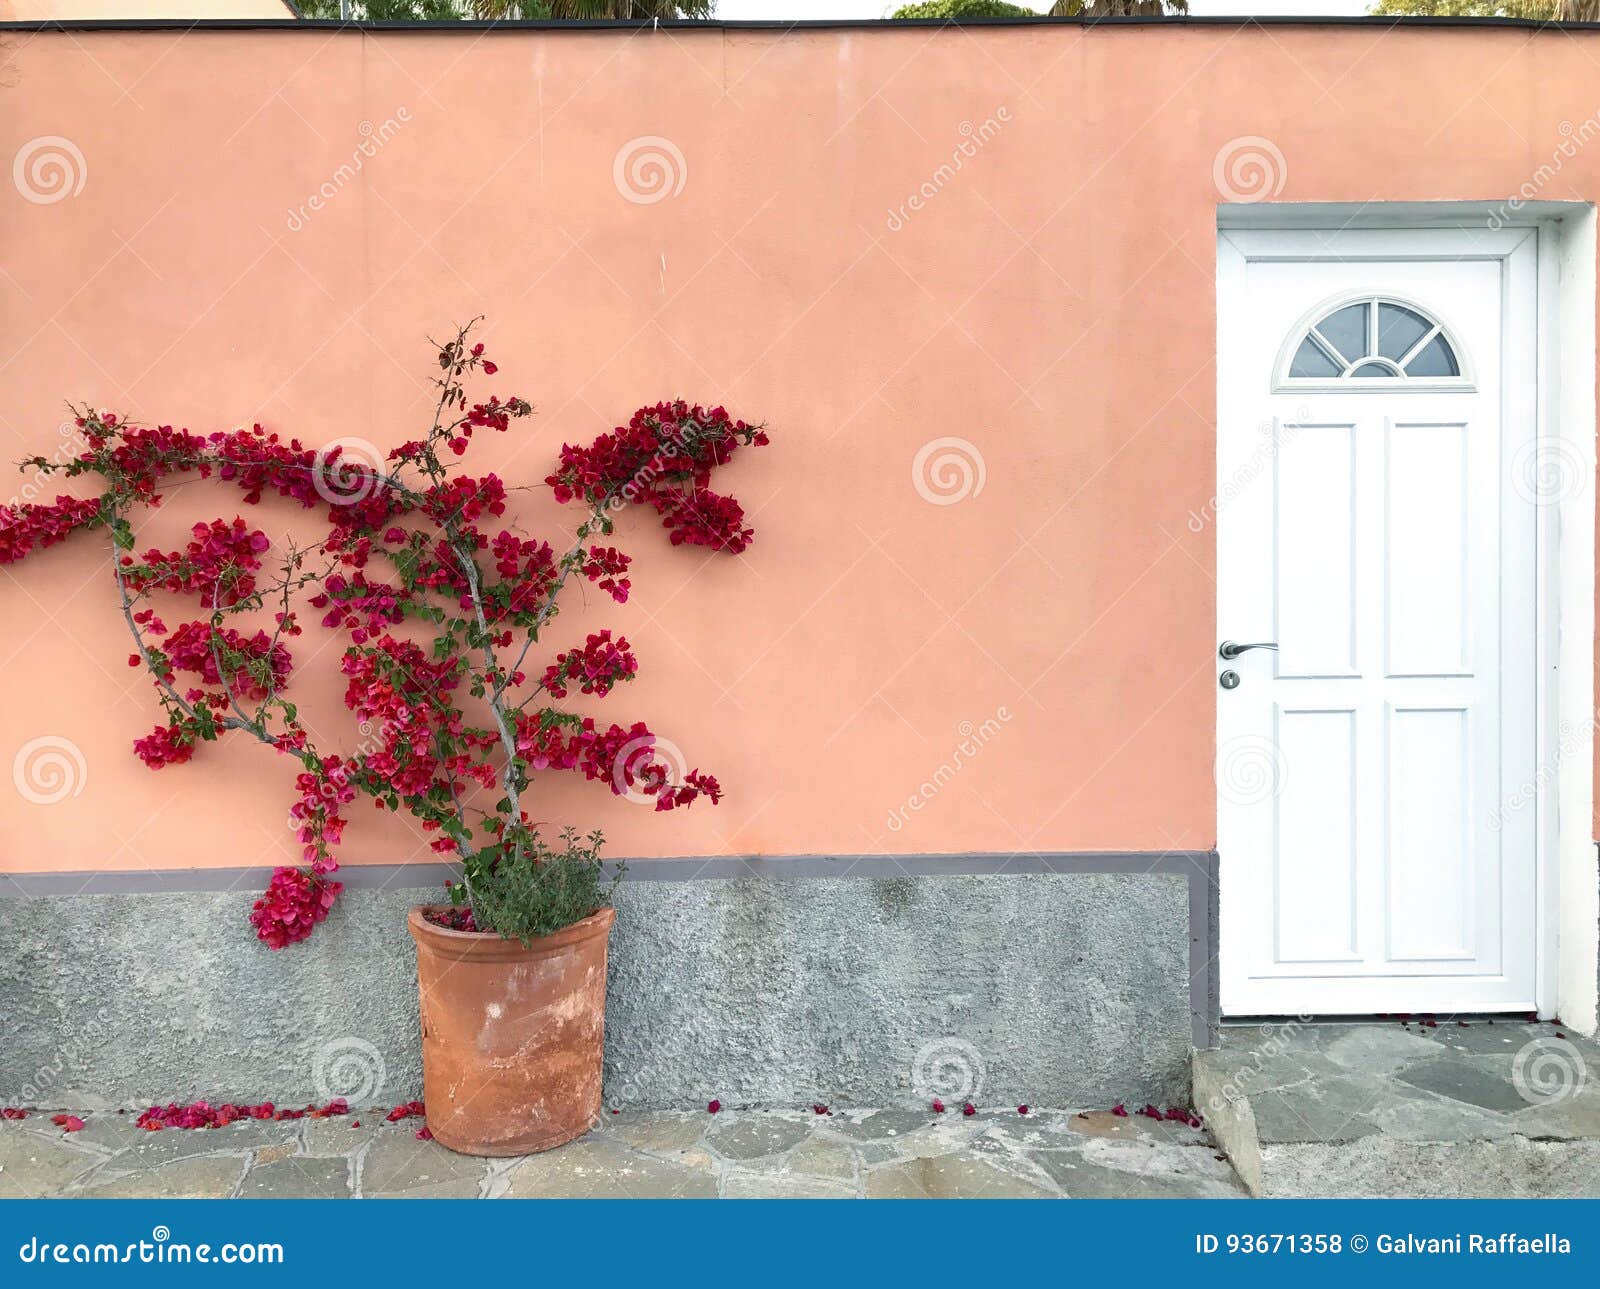 Bougainvillea Grows Near the Exterior Wall of the House Stock Photo - Image  of summer, ornamental: 93671358